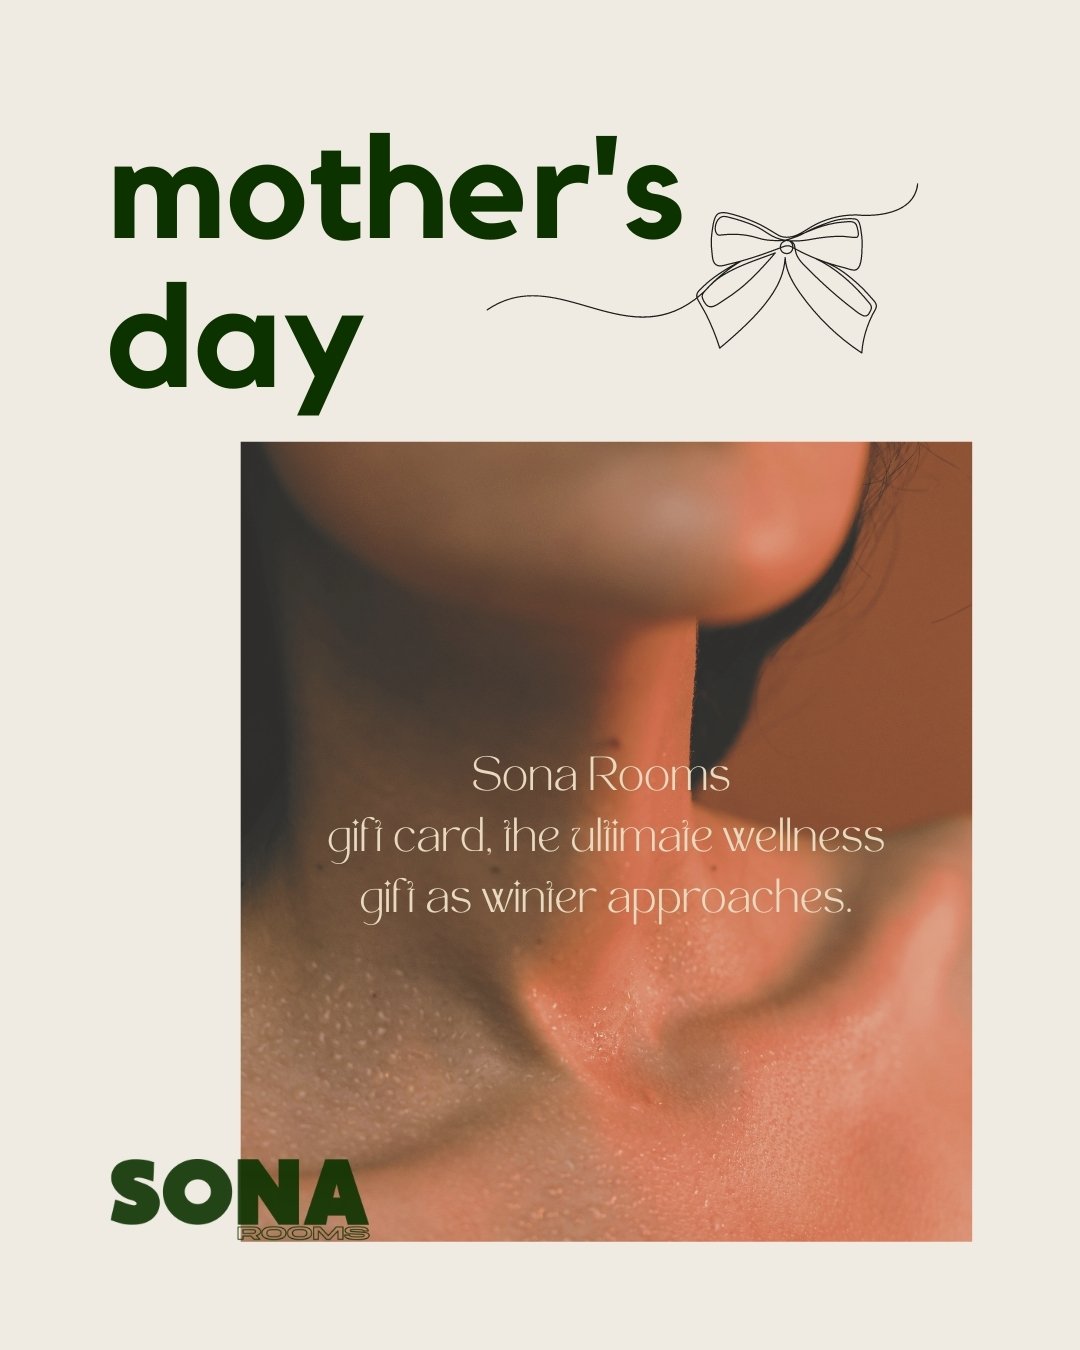 Warm your mum's heart, or the heart of any mother figure in your life, this Mother's Day with the perfect present for the cooler months &ndash; a Sona Rooms gift card, the ultimate wellness gift as winter approaches. To purchase simply head to the li